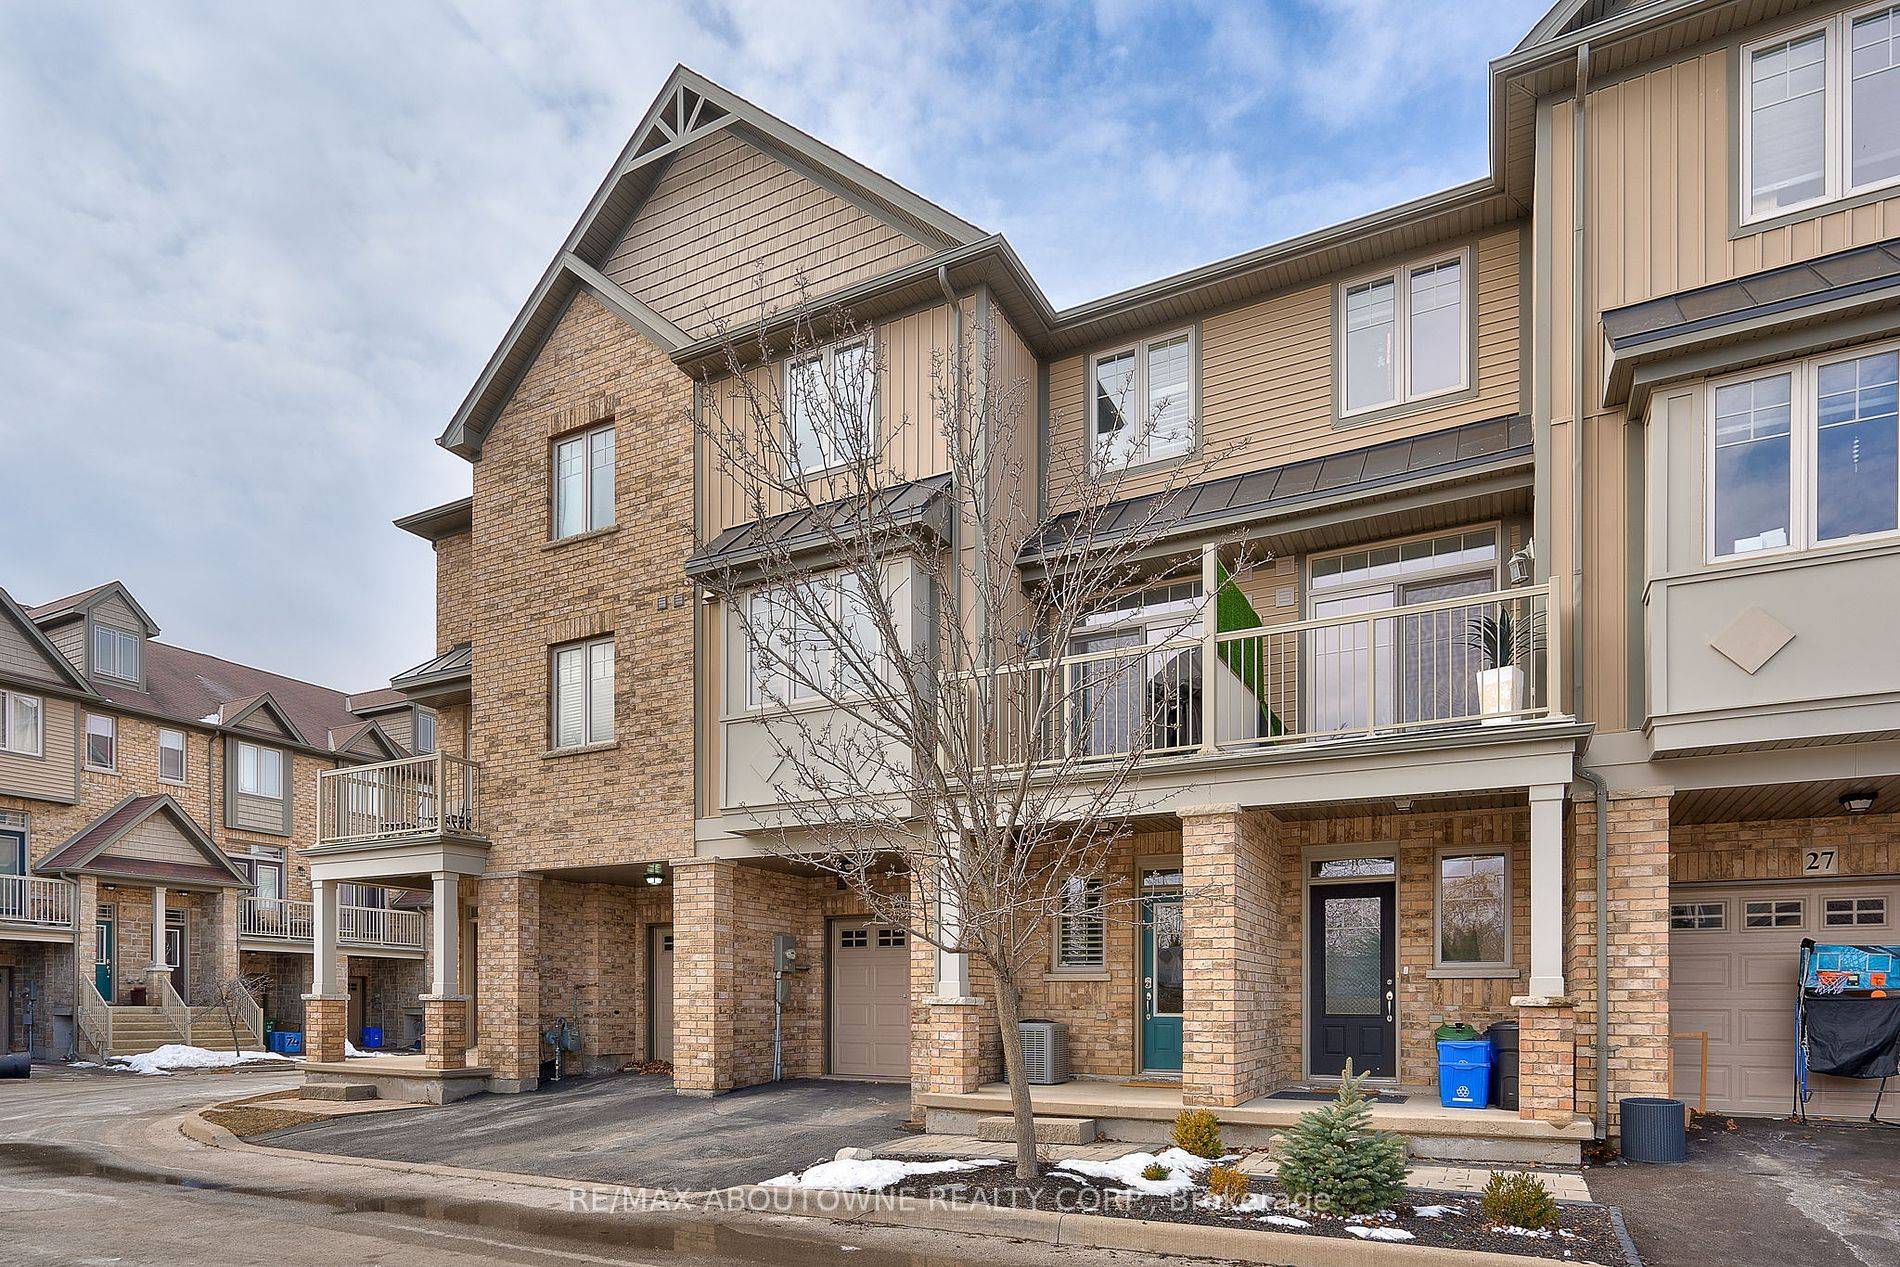 Fabulous 2 bedroom, 2 bathroom townhome located in the Parkside Village community of Binbrook.